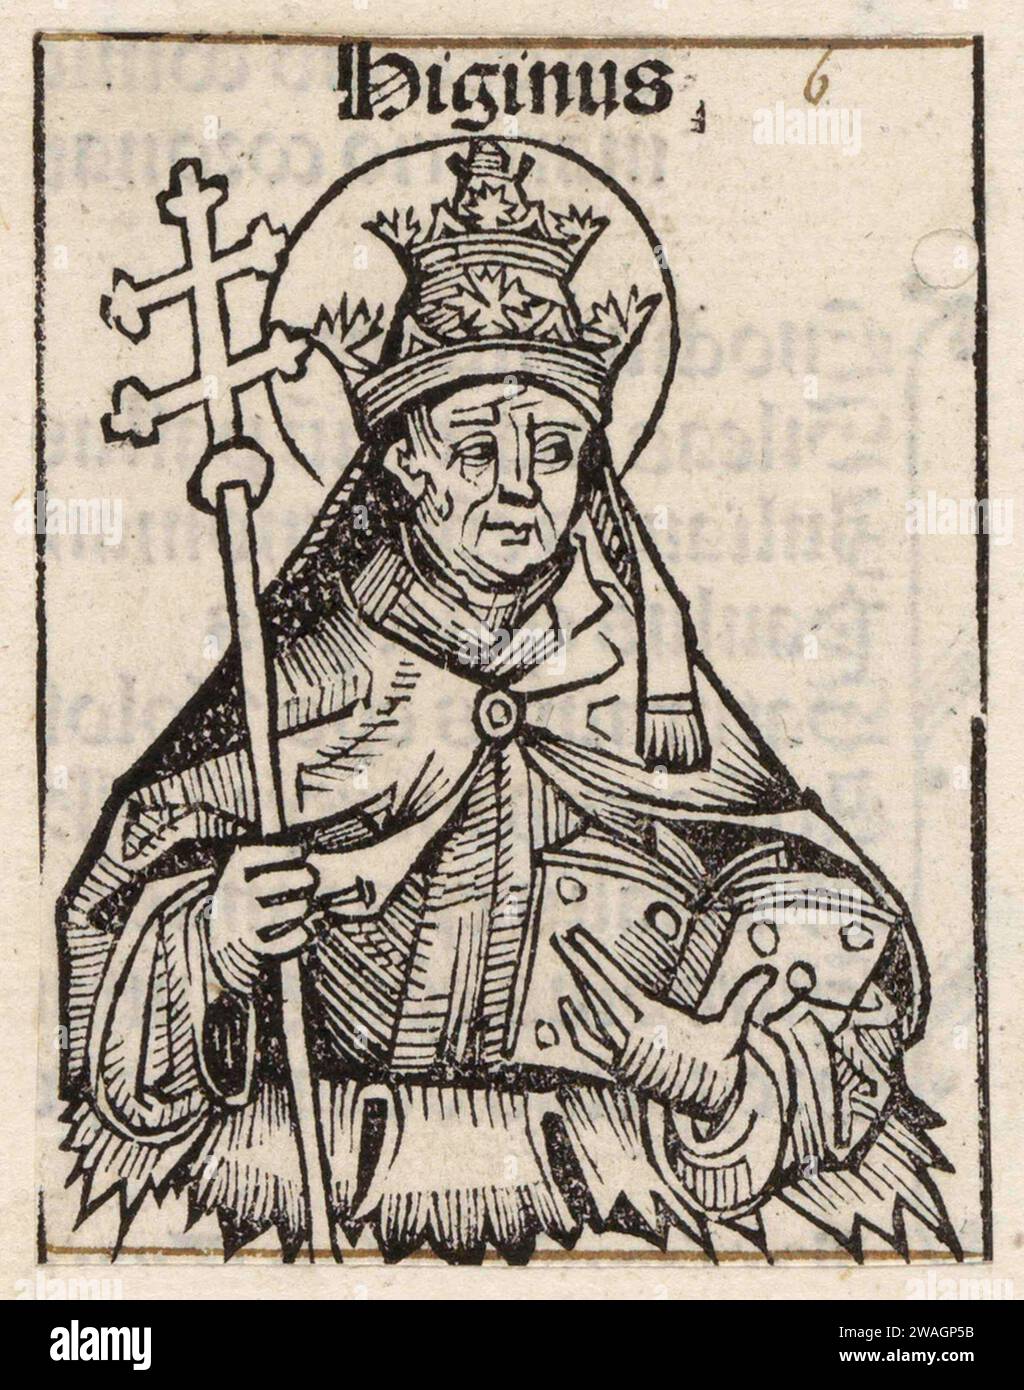 A 1493 illustration of Pope Hyginus, who was pontiff from AD136 to AD140. He was the ninth pope. He was Greek and it was he that introduced the idea of godparents to help baptised children during their Christian life and duties. Stock Photo